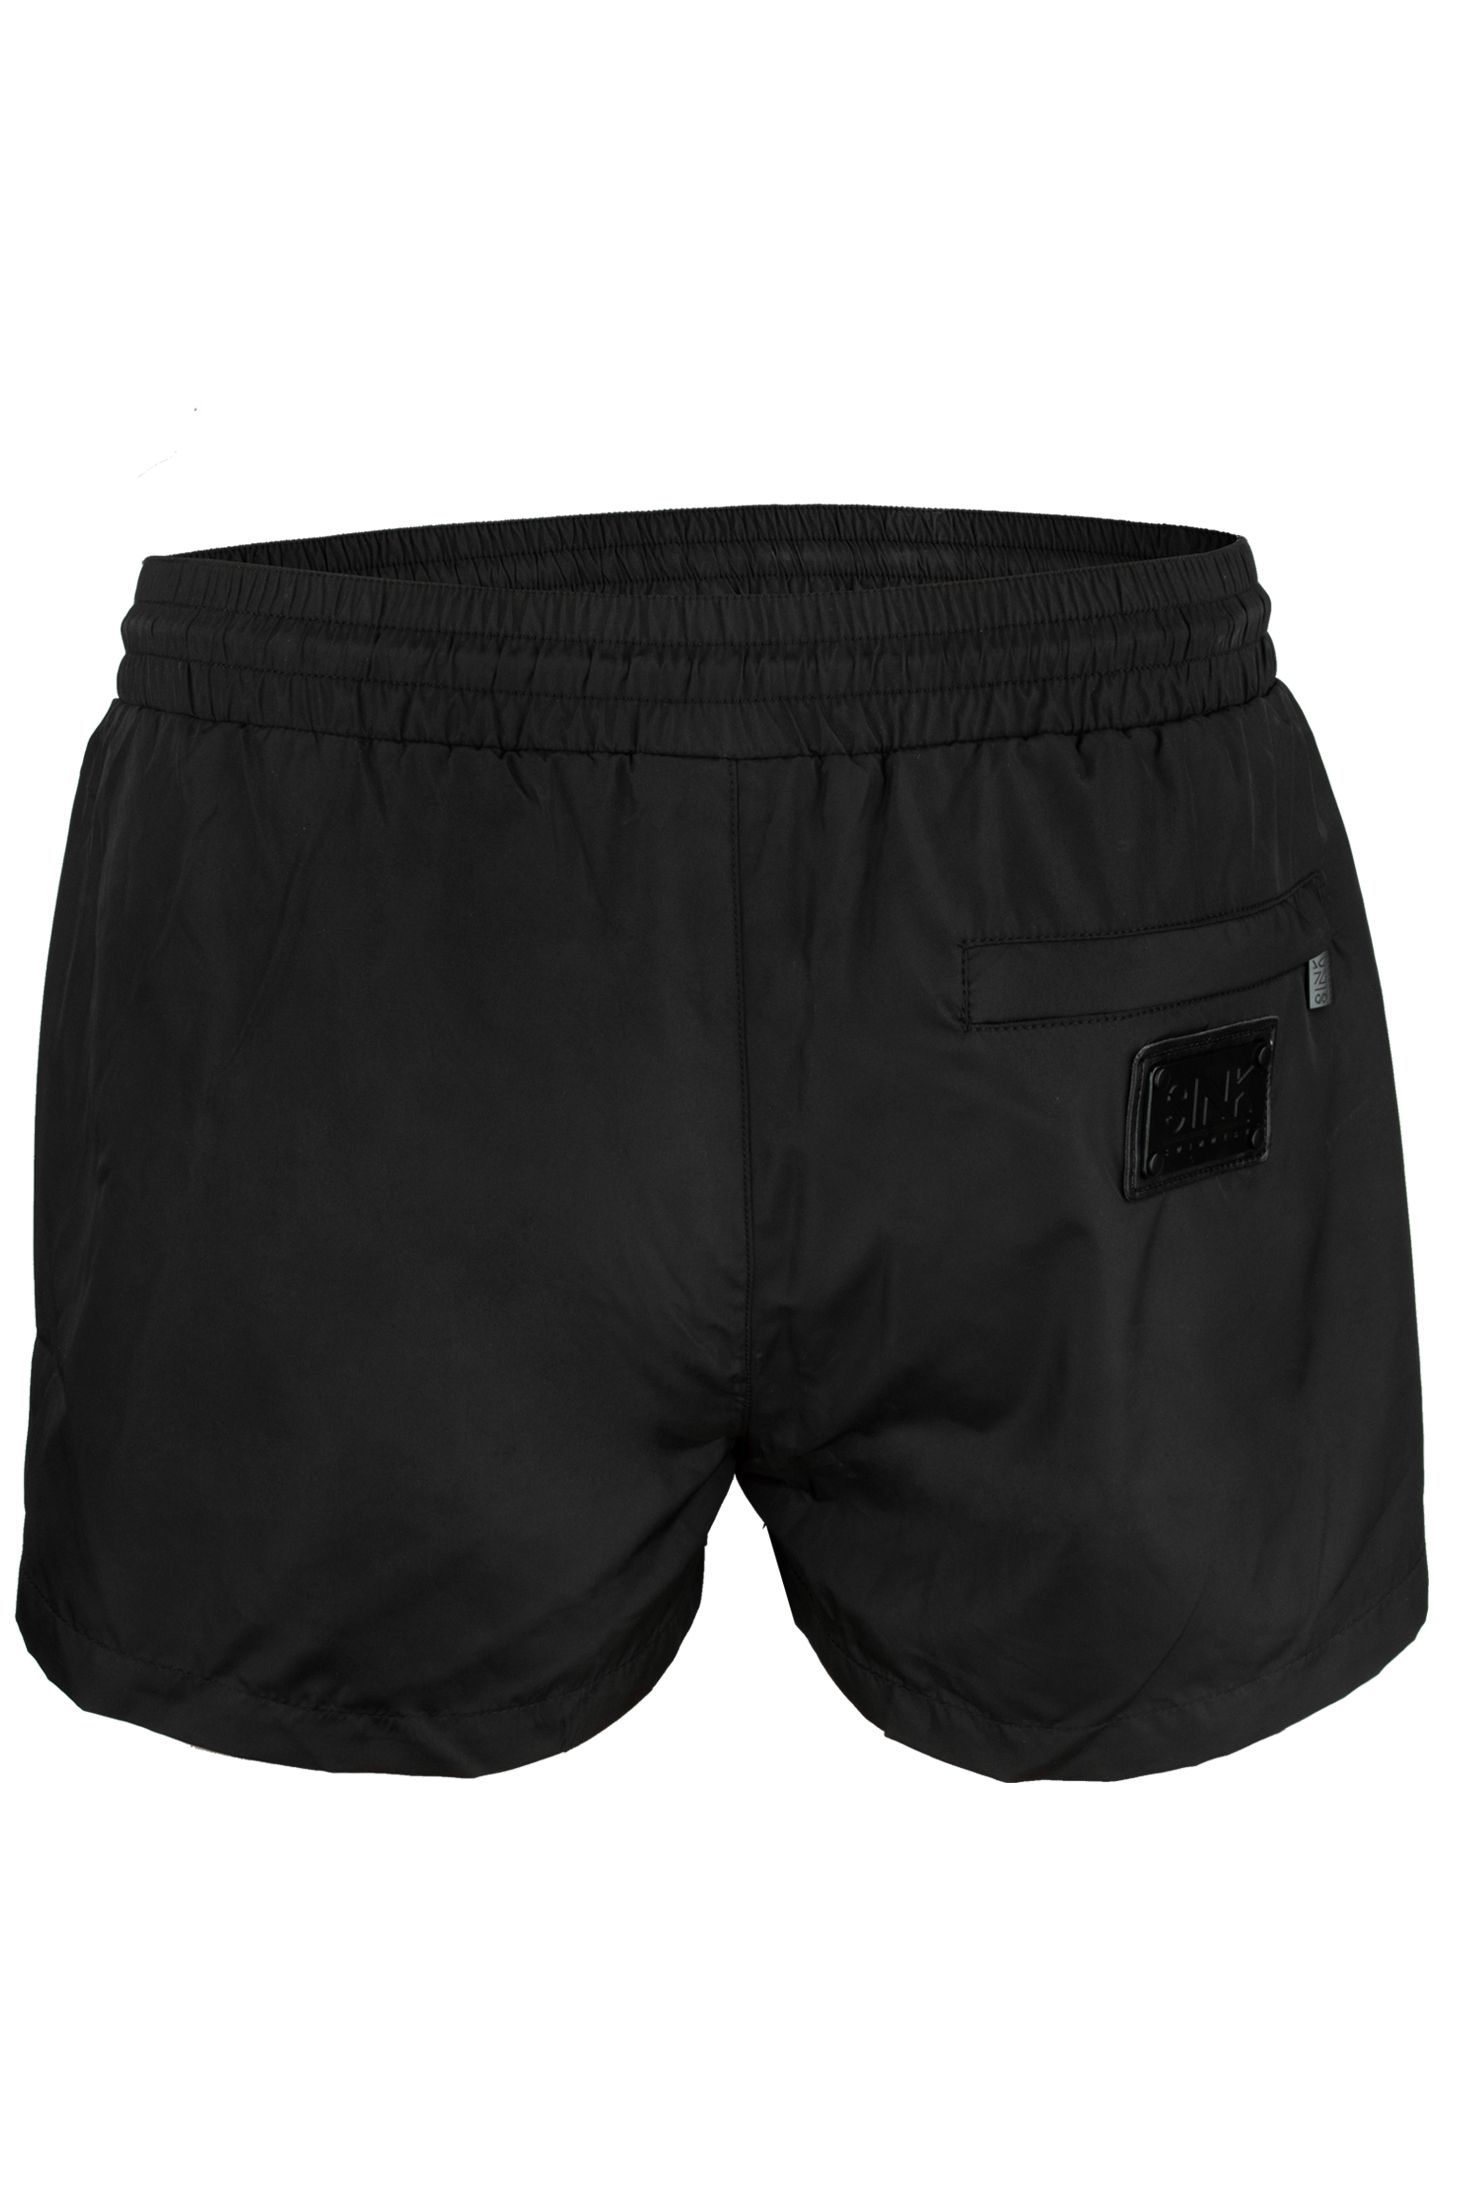 Designed in-house by our dedicated menswear team, Sink Swimwear have designed and created these shorts to perfection. You will not find a more stylish or higher quality pair of shorts anywhere else.

*Model Ross wears a size medium and is 5 ft 9 with 32 Inch Waist

Our quick dry Black shorts with Matte Black detailing not only look the part with their distinctive and stunning Matte Black metal plaque mounted on hand crafted leather on the back pocket but are even further detailed with stunning Matte Black zip pockets either side and another Matte Black zip concealed in the back pocket. Elasticated waistband with drawstring to fit finished off beautifully with our Matte Black engraved toggles. You will see our signature logo hand stitched into the bottom front left side. Your Sink shorts come wrapped in a luxury gift box to further enhance your experience with Sink.
These are simply the best and most stylish pair of swim shorts you will ever own.